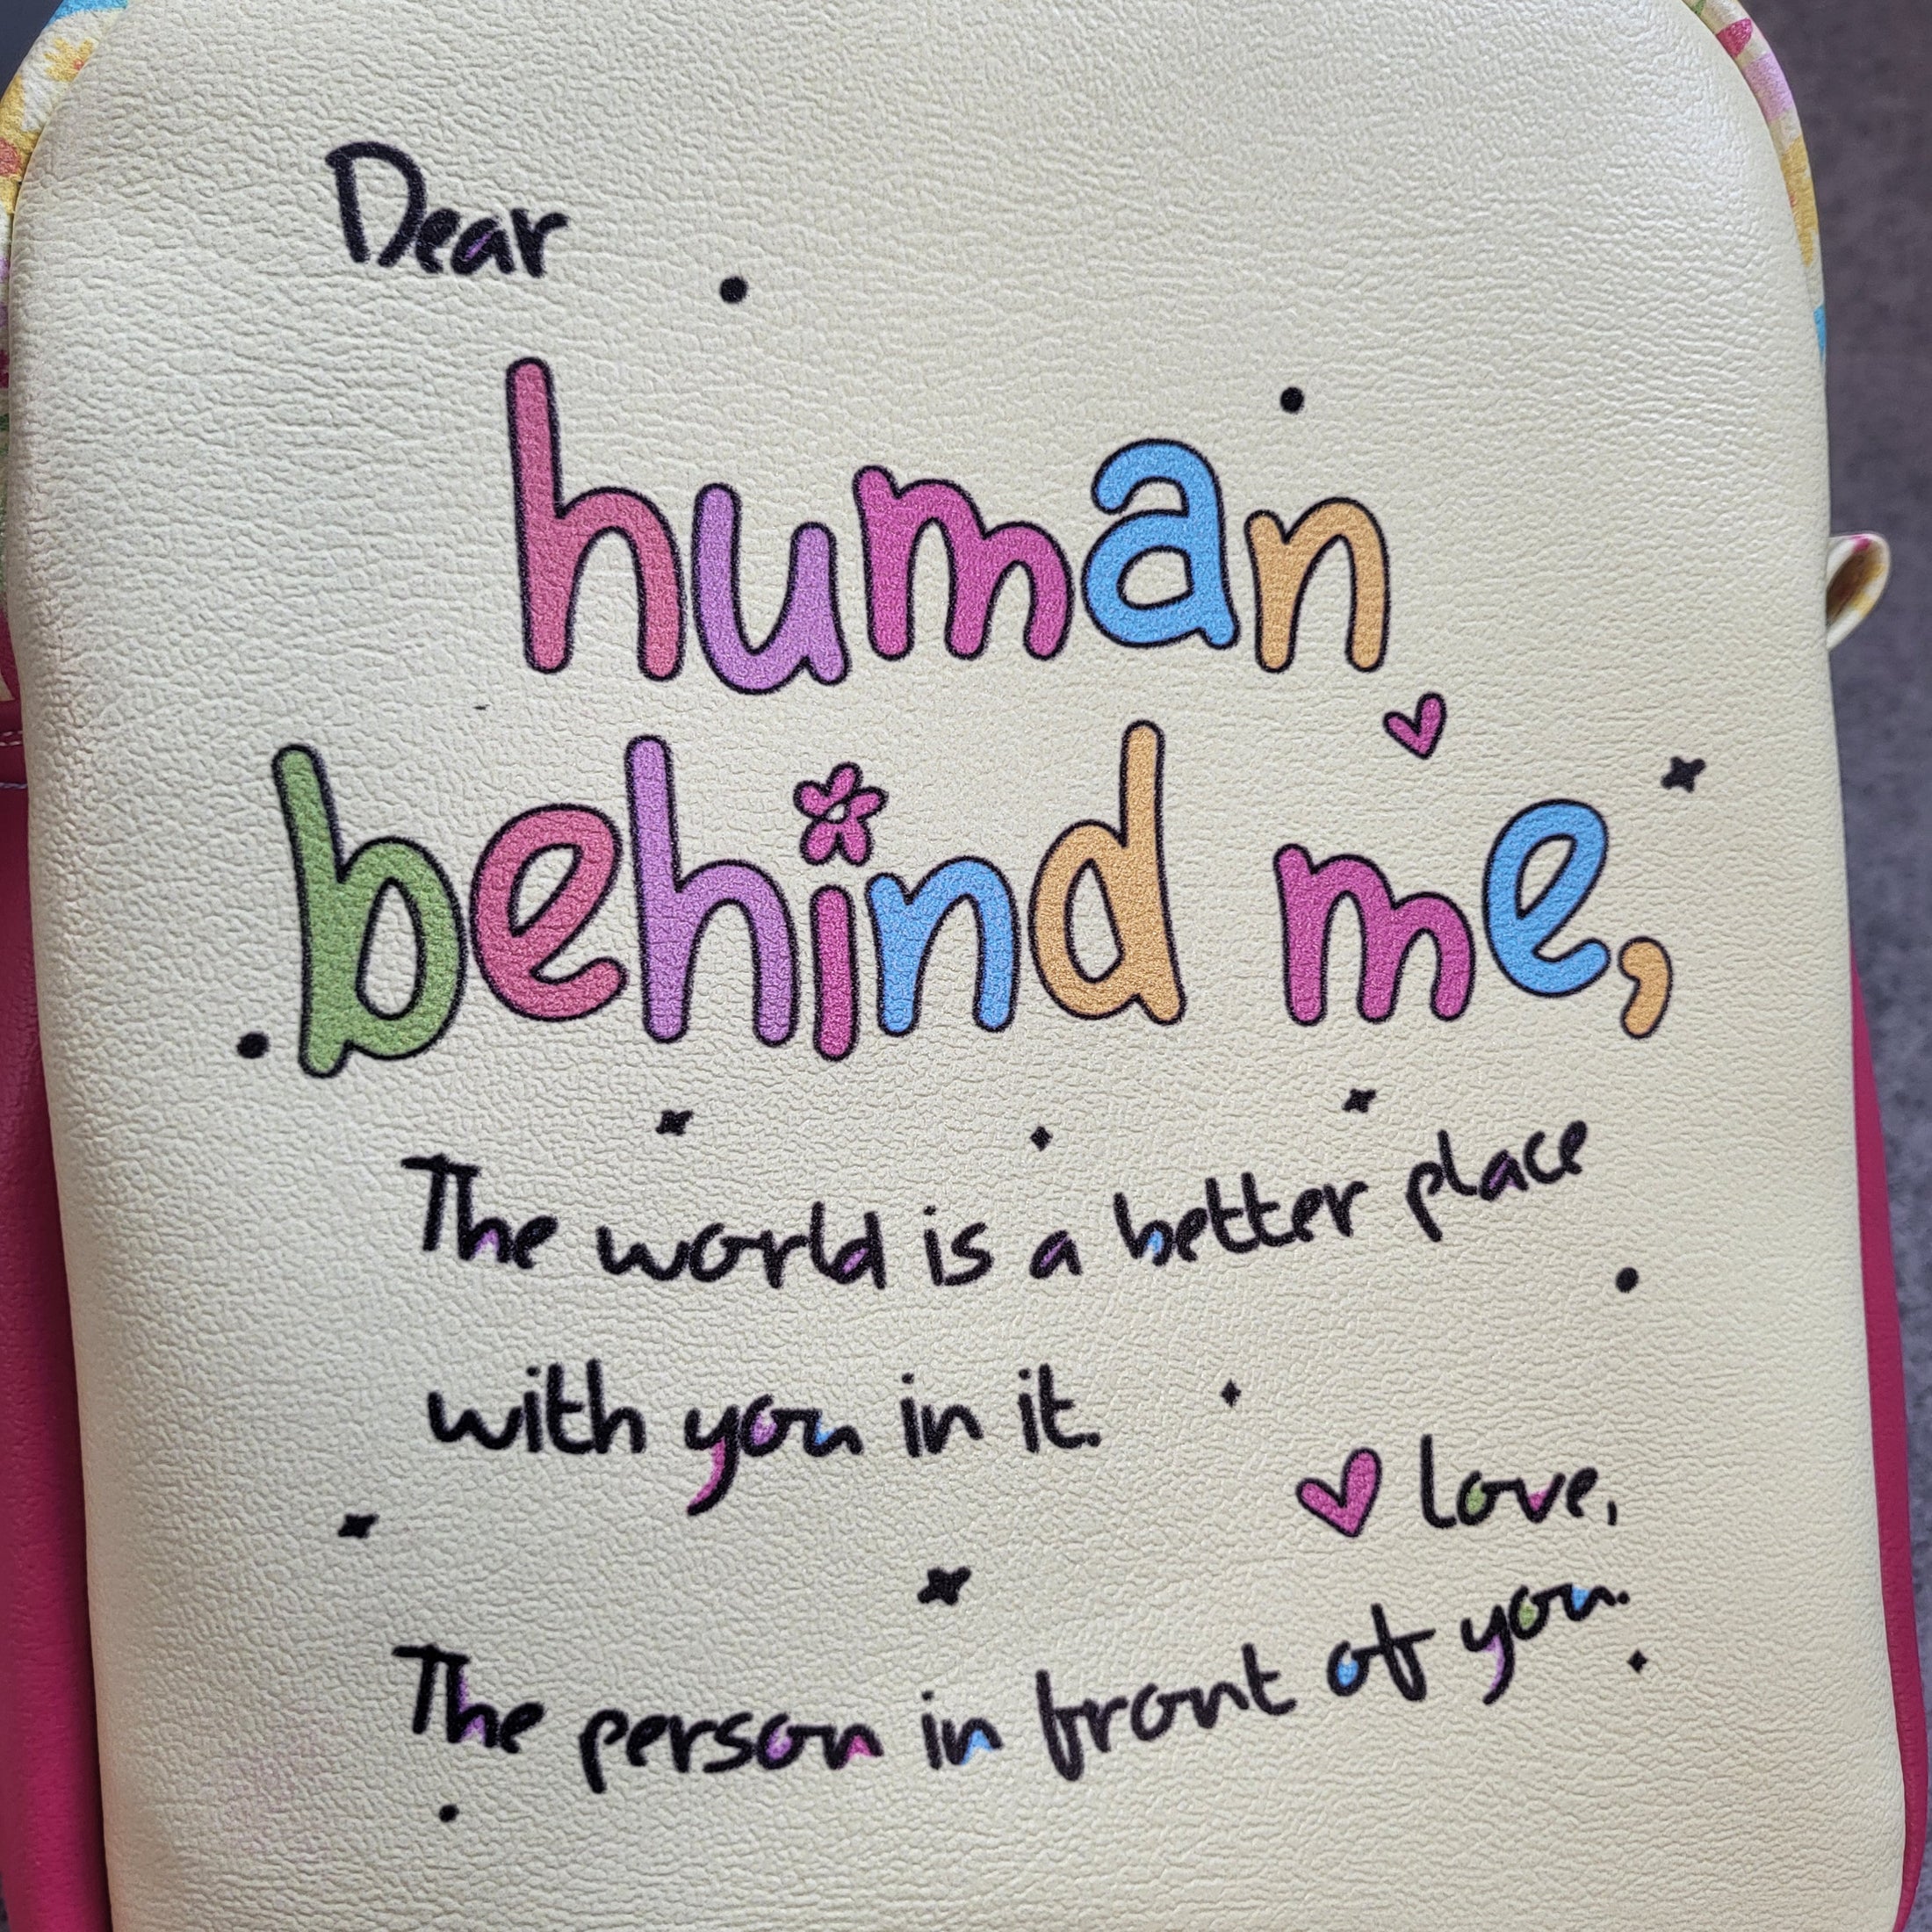 Dear human behind me, the world is a better place with you in it, love, the person in front of you sling bag.